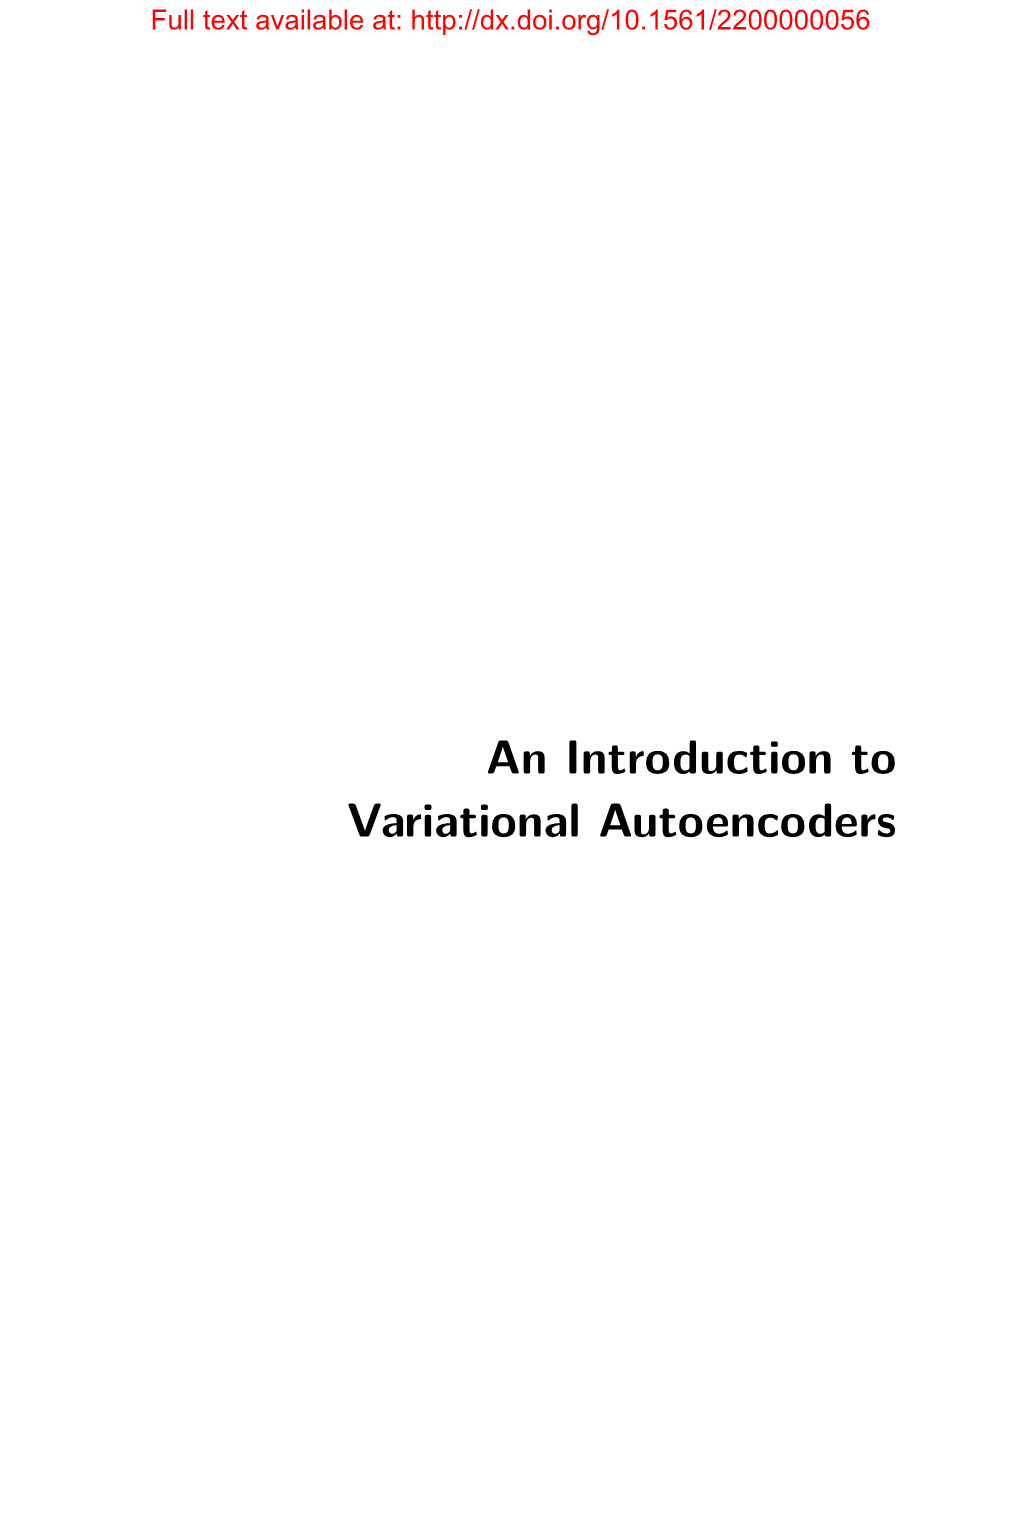 An Introduction to Variational Autoencoders Full Text Available At